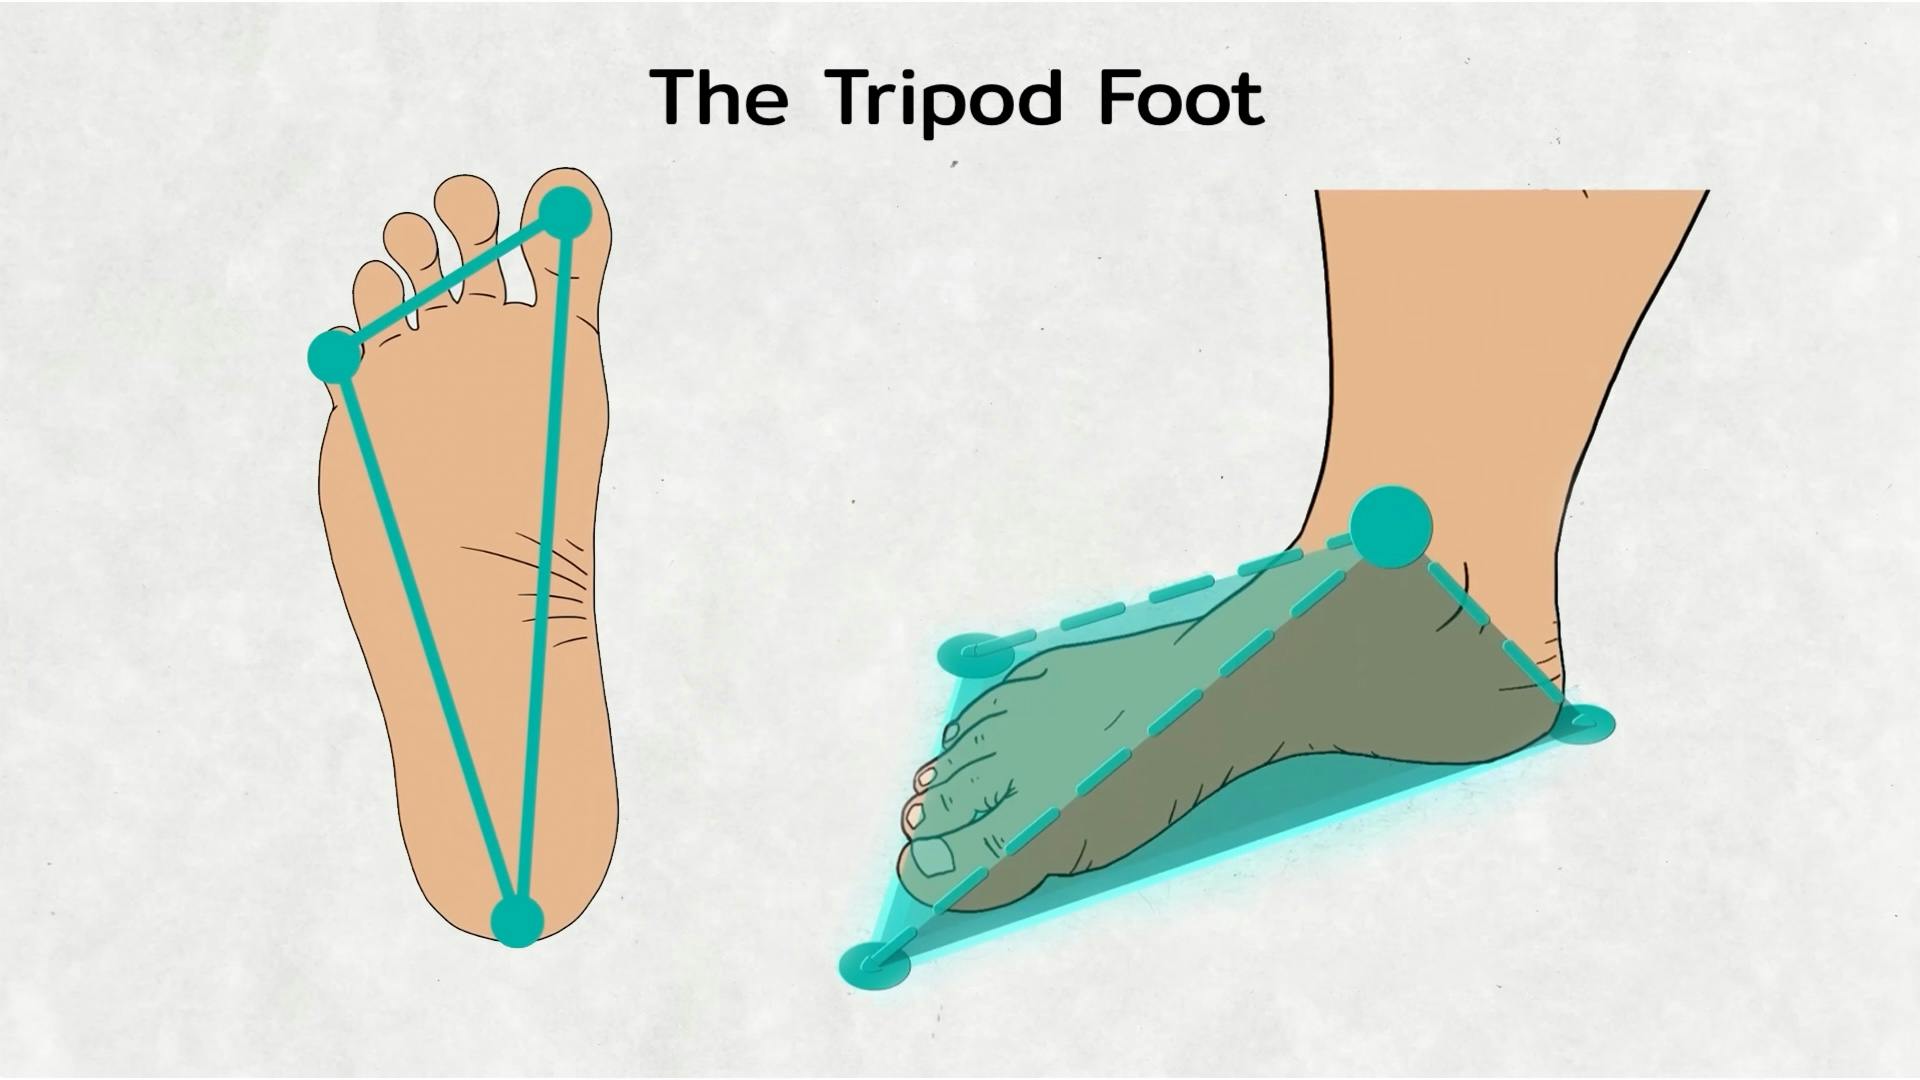 The stable tripod foot